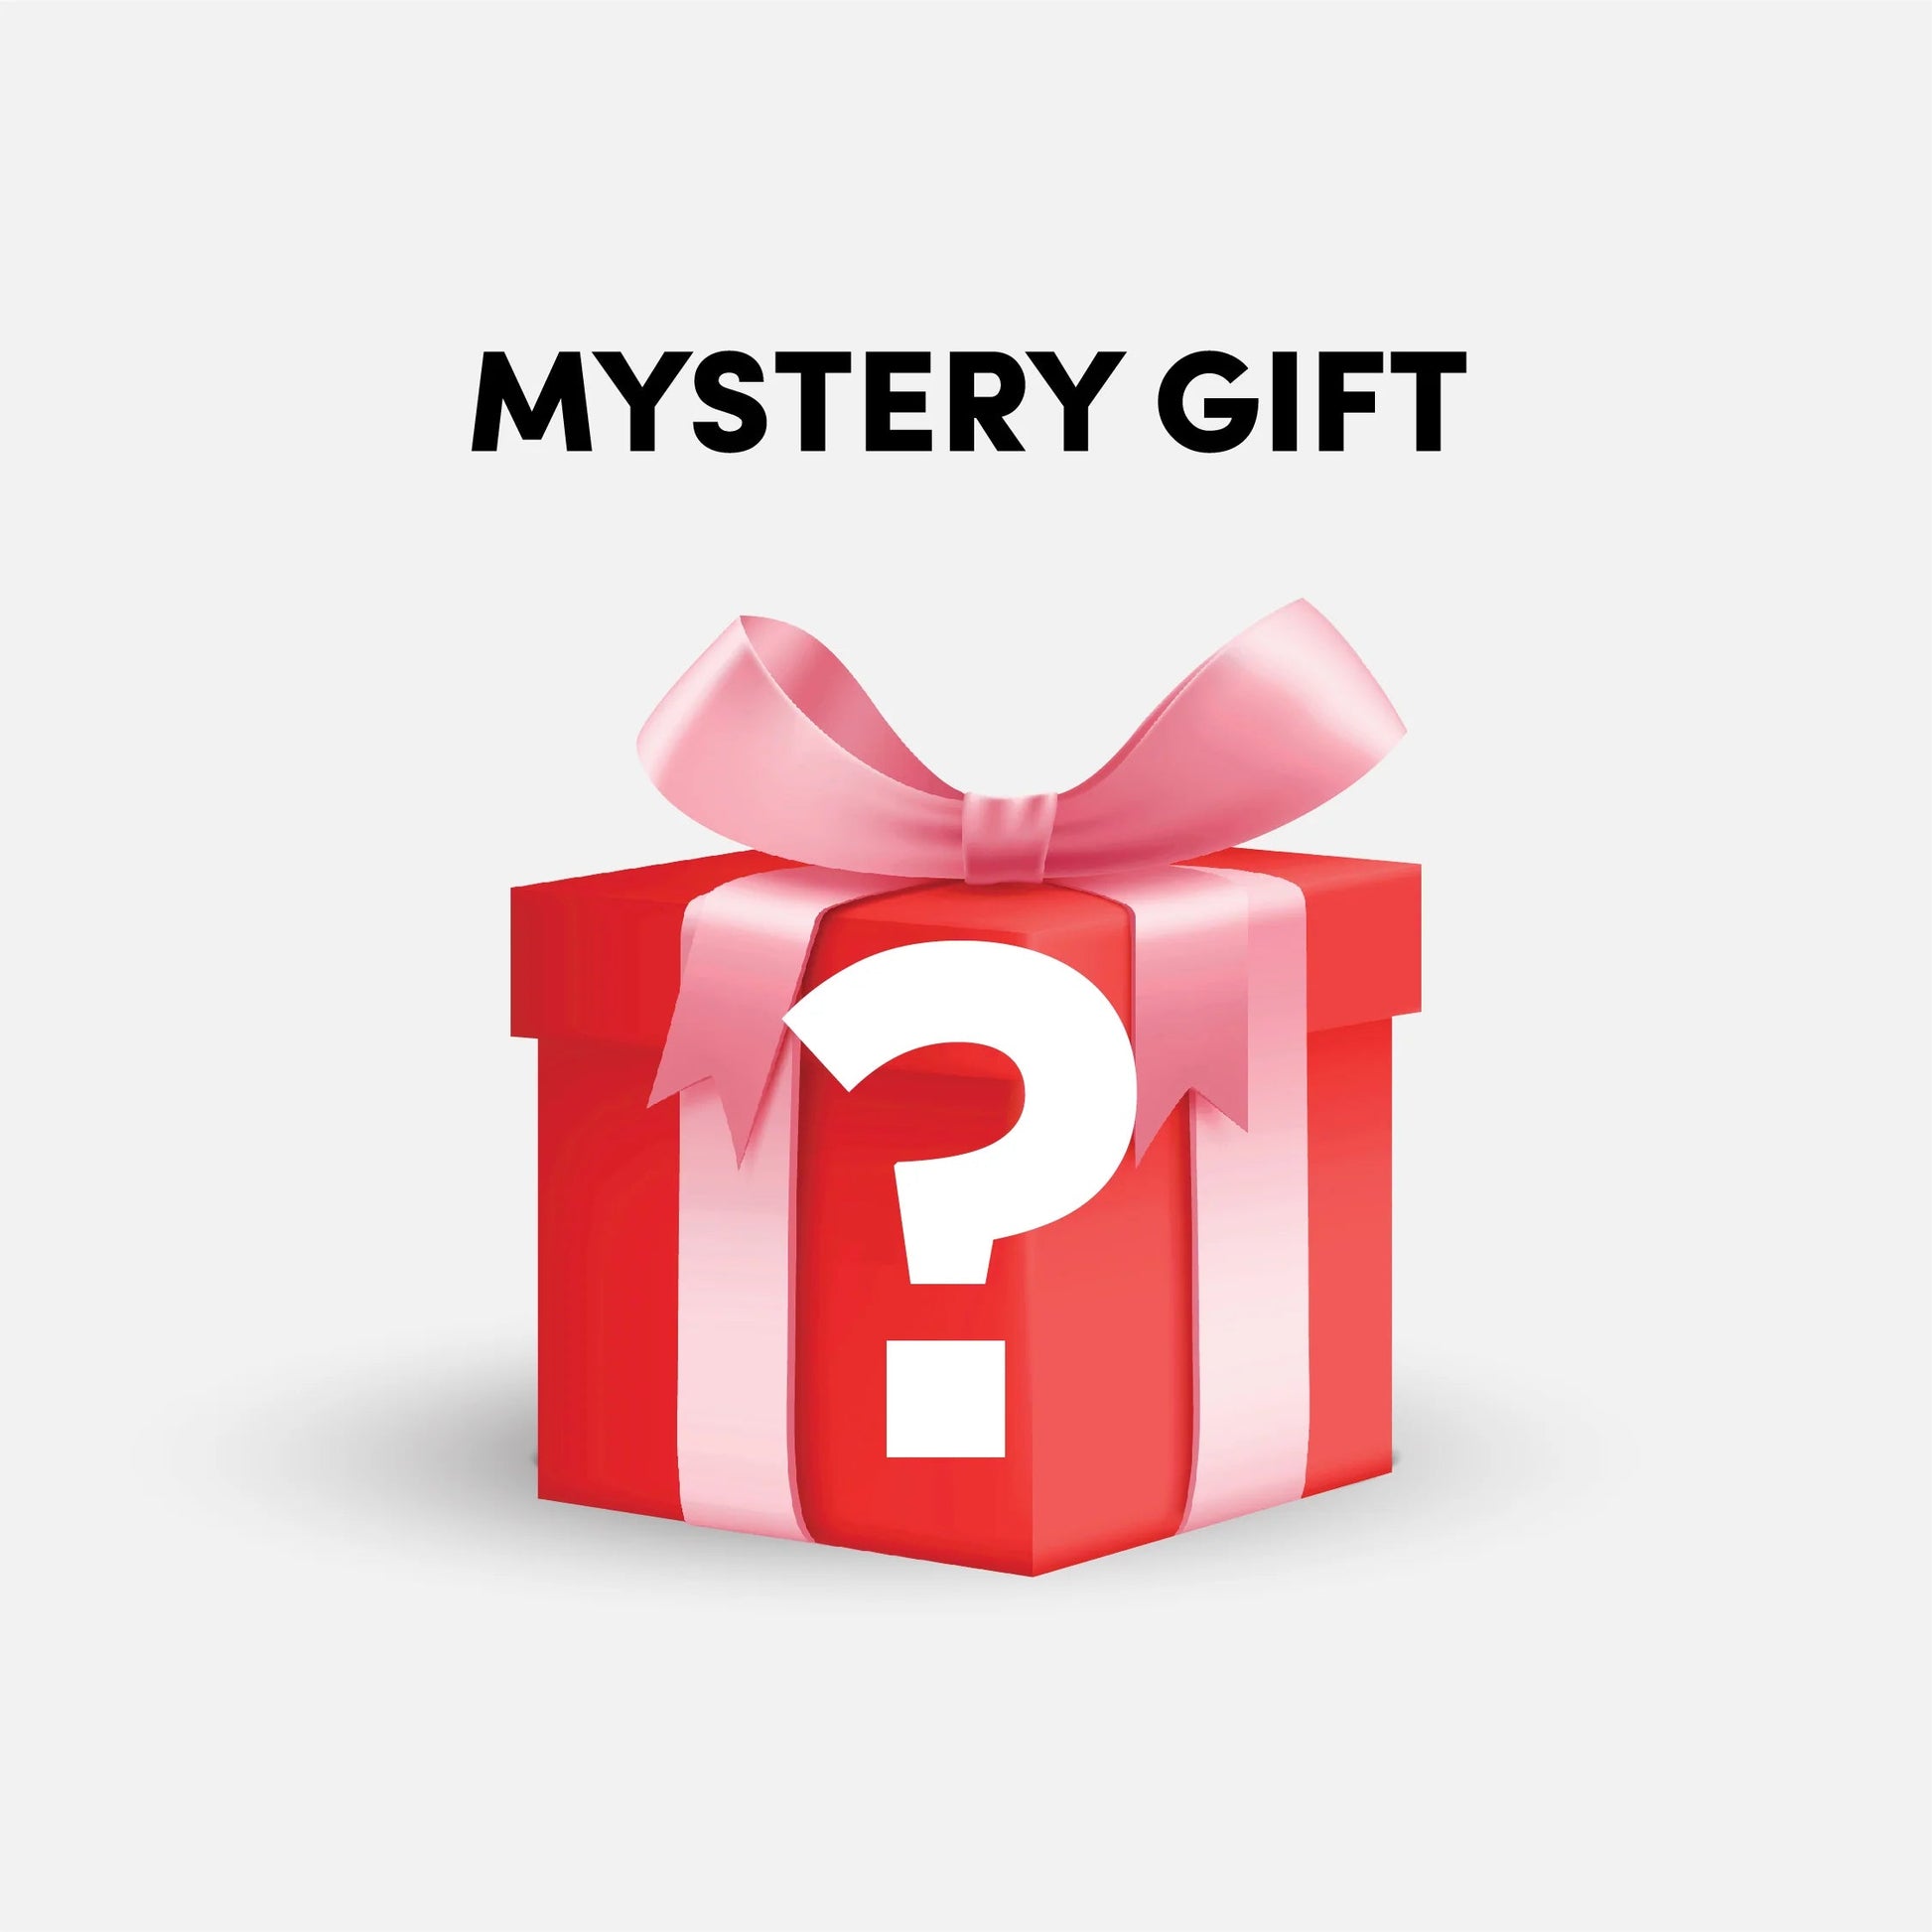 Free Mystery Gift when you spend £20! - Natural Doggy Treats